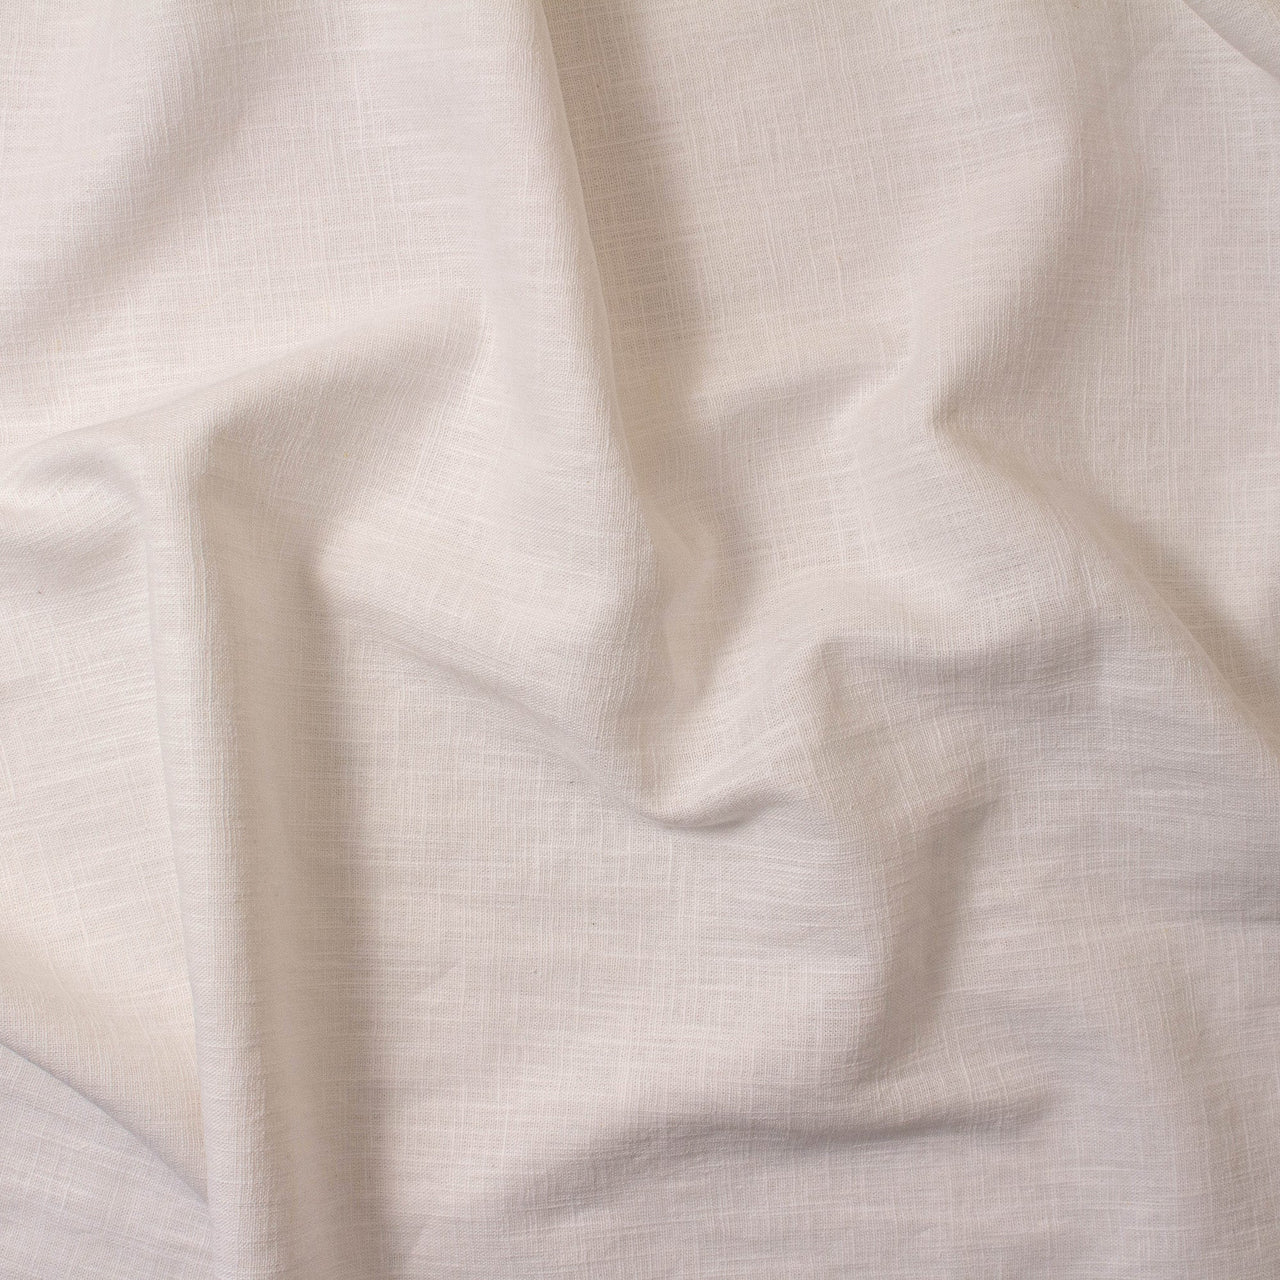 White -  Eco Friendly 100% Linen Fabric -Superior Quality Enzyme washed and Okeo-Tex Cert